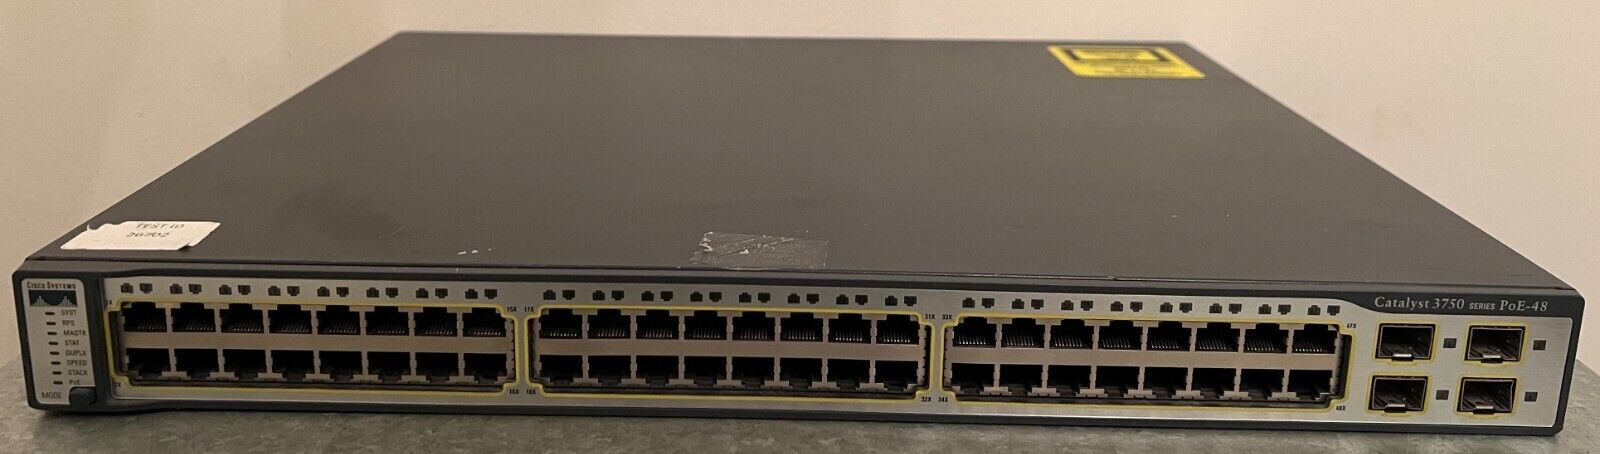 Cisco Catalyst 3750-48PS Switch with PoE